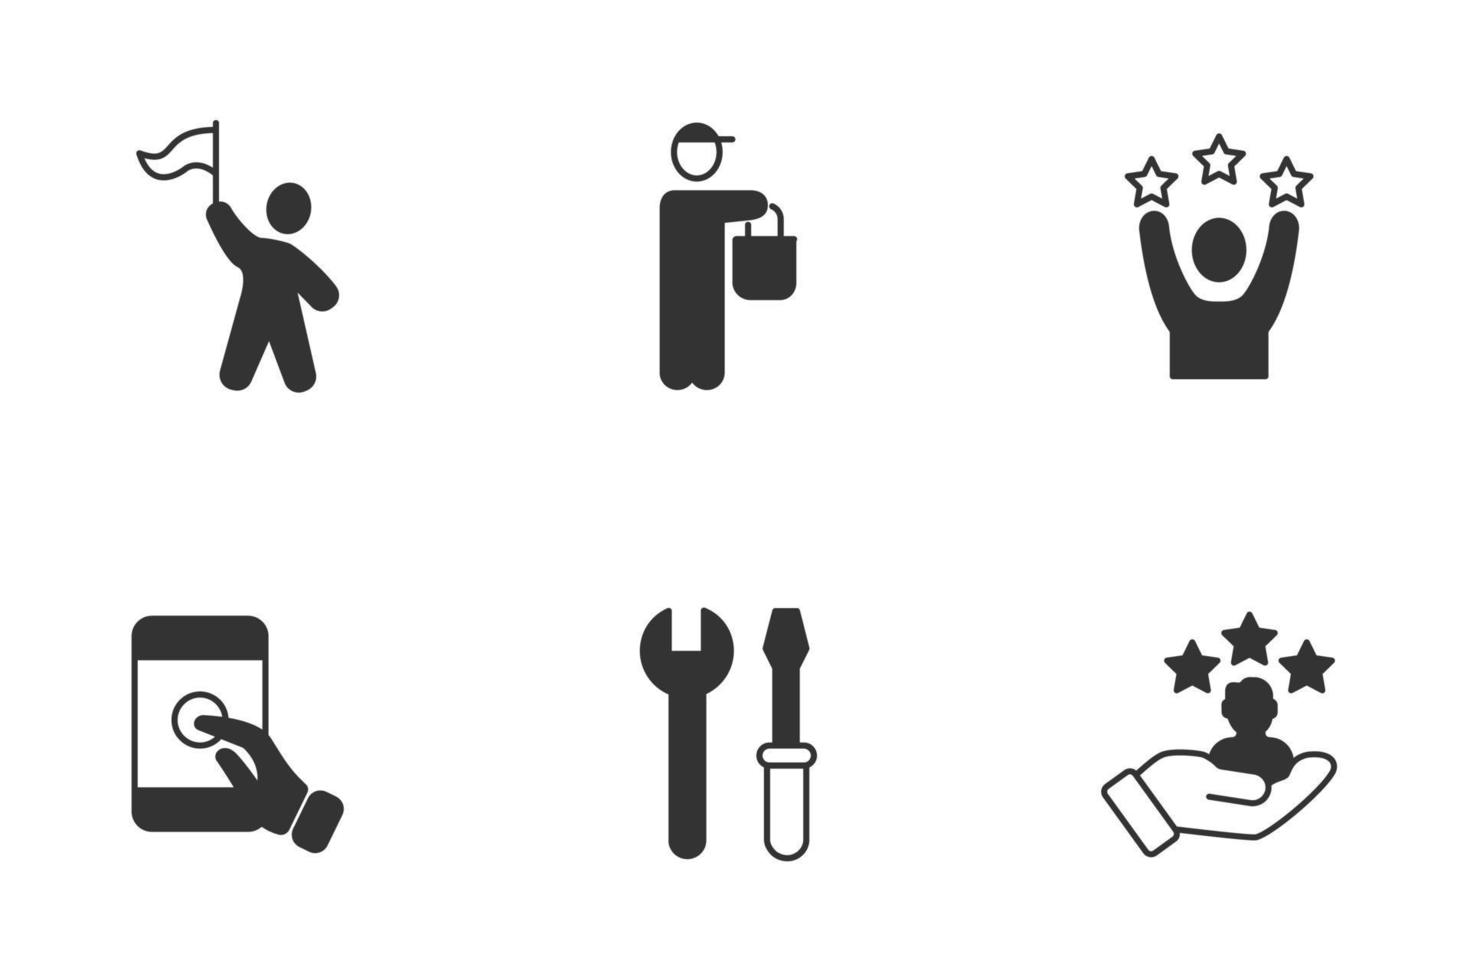 Traineeship program and apprenticeship icons set . Traineeship program and apprenticeship pack symbol vector elements for infographic web